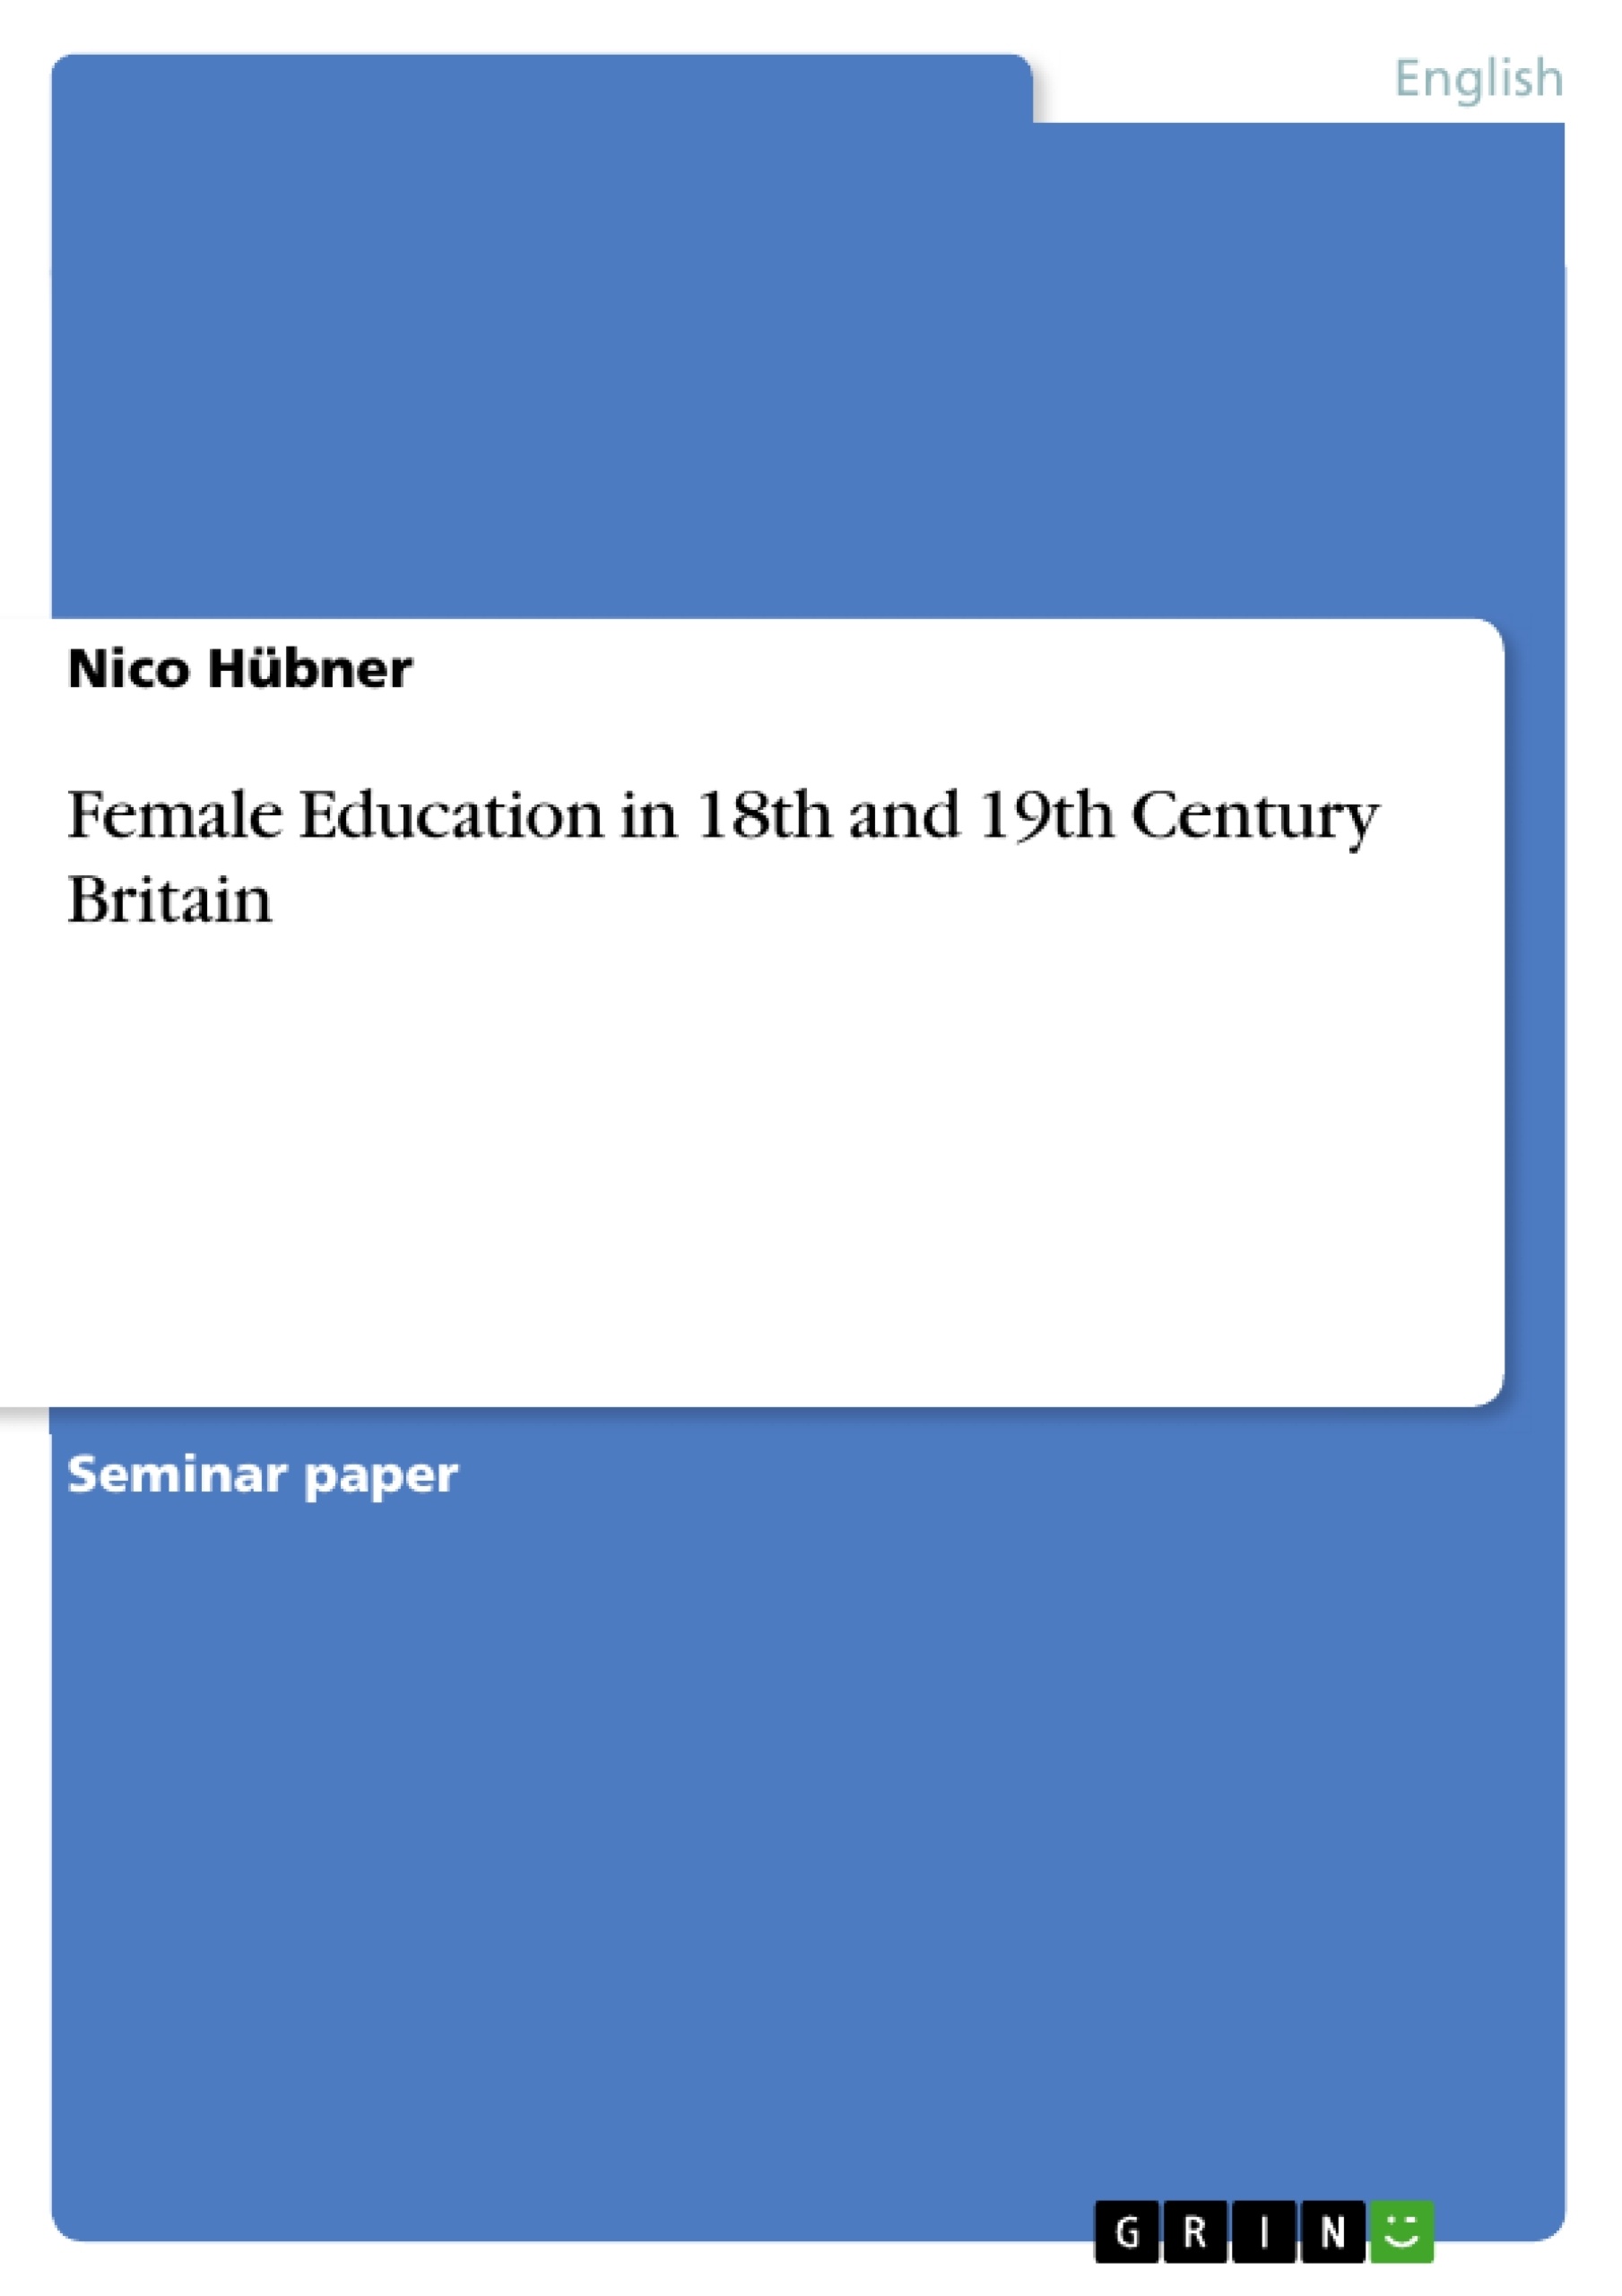 Titre: Female Education in 18th and 19th Century Britain